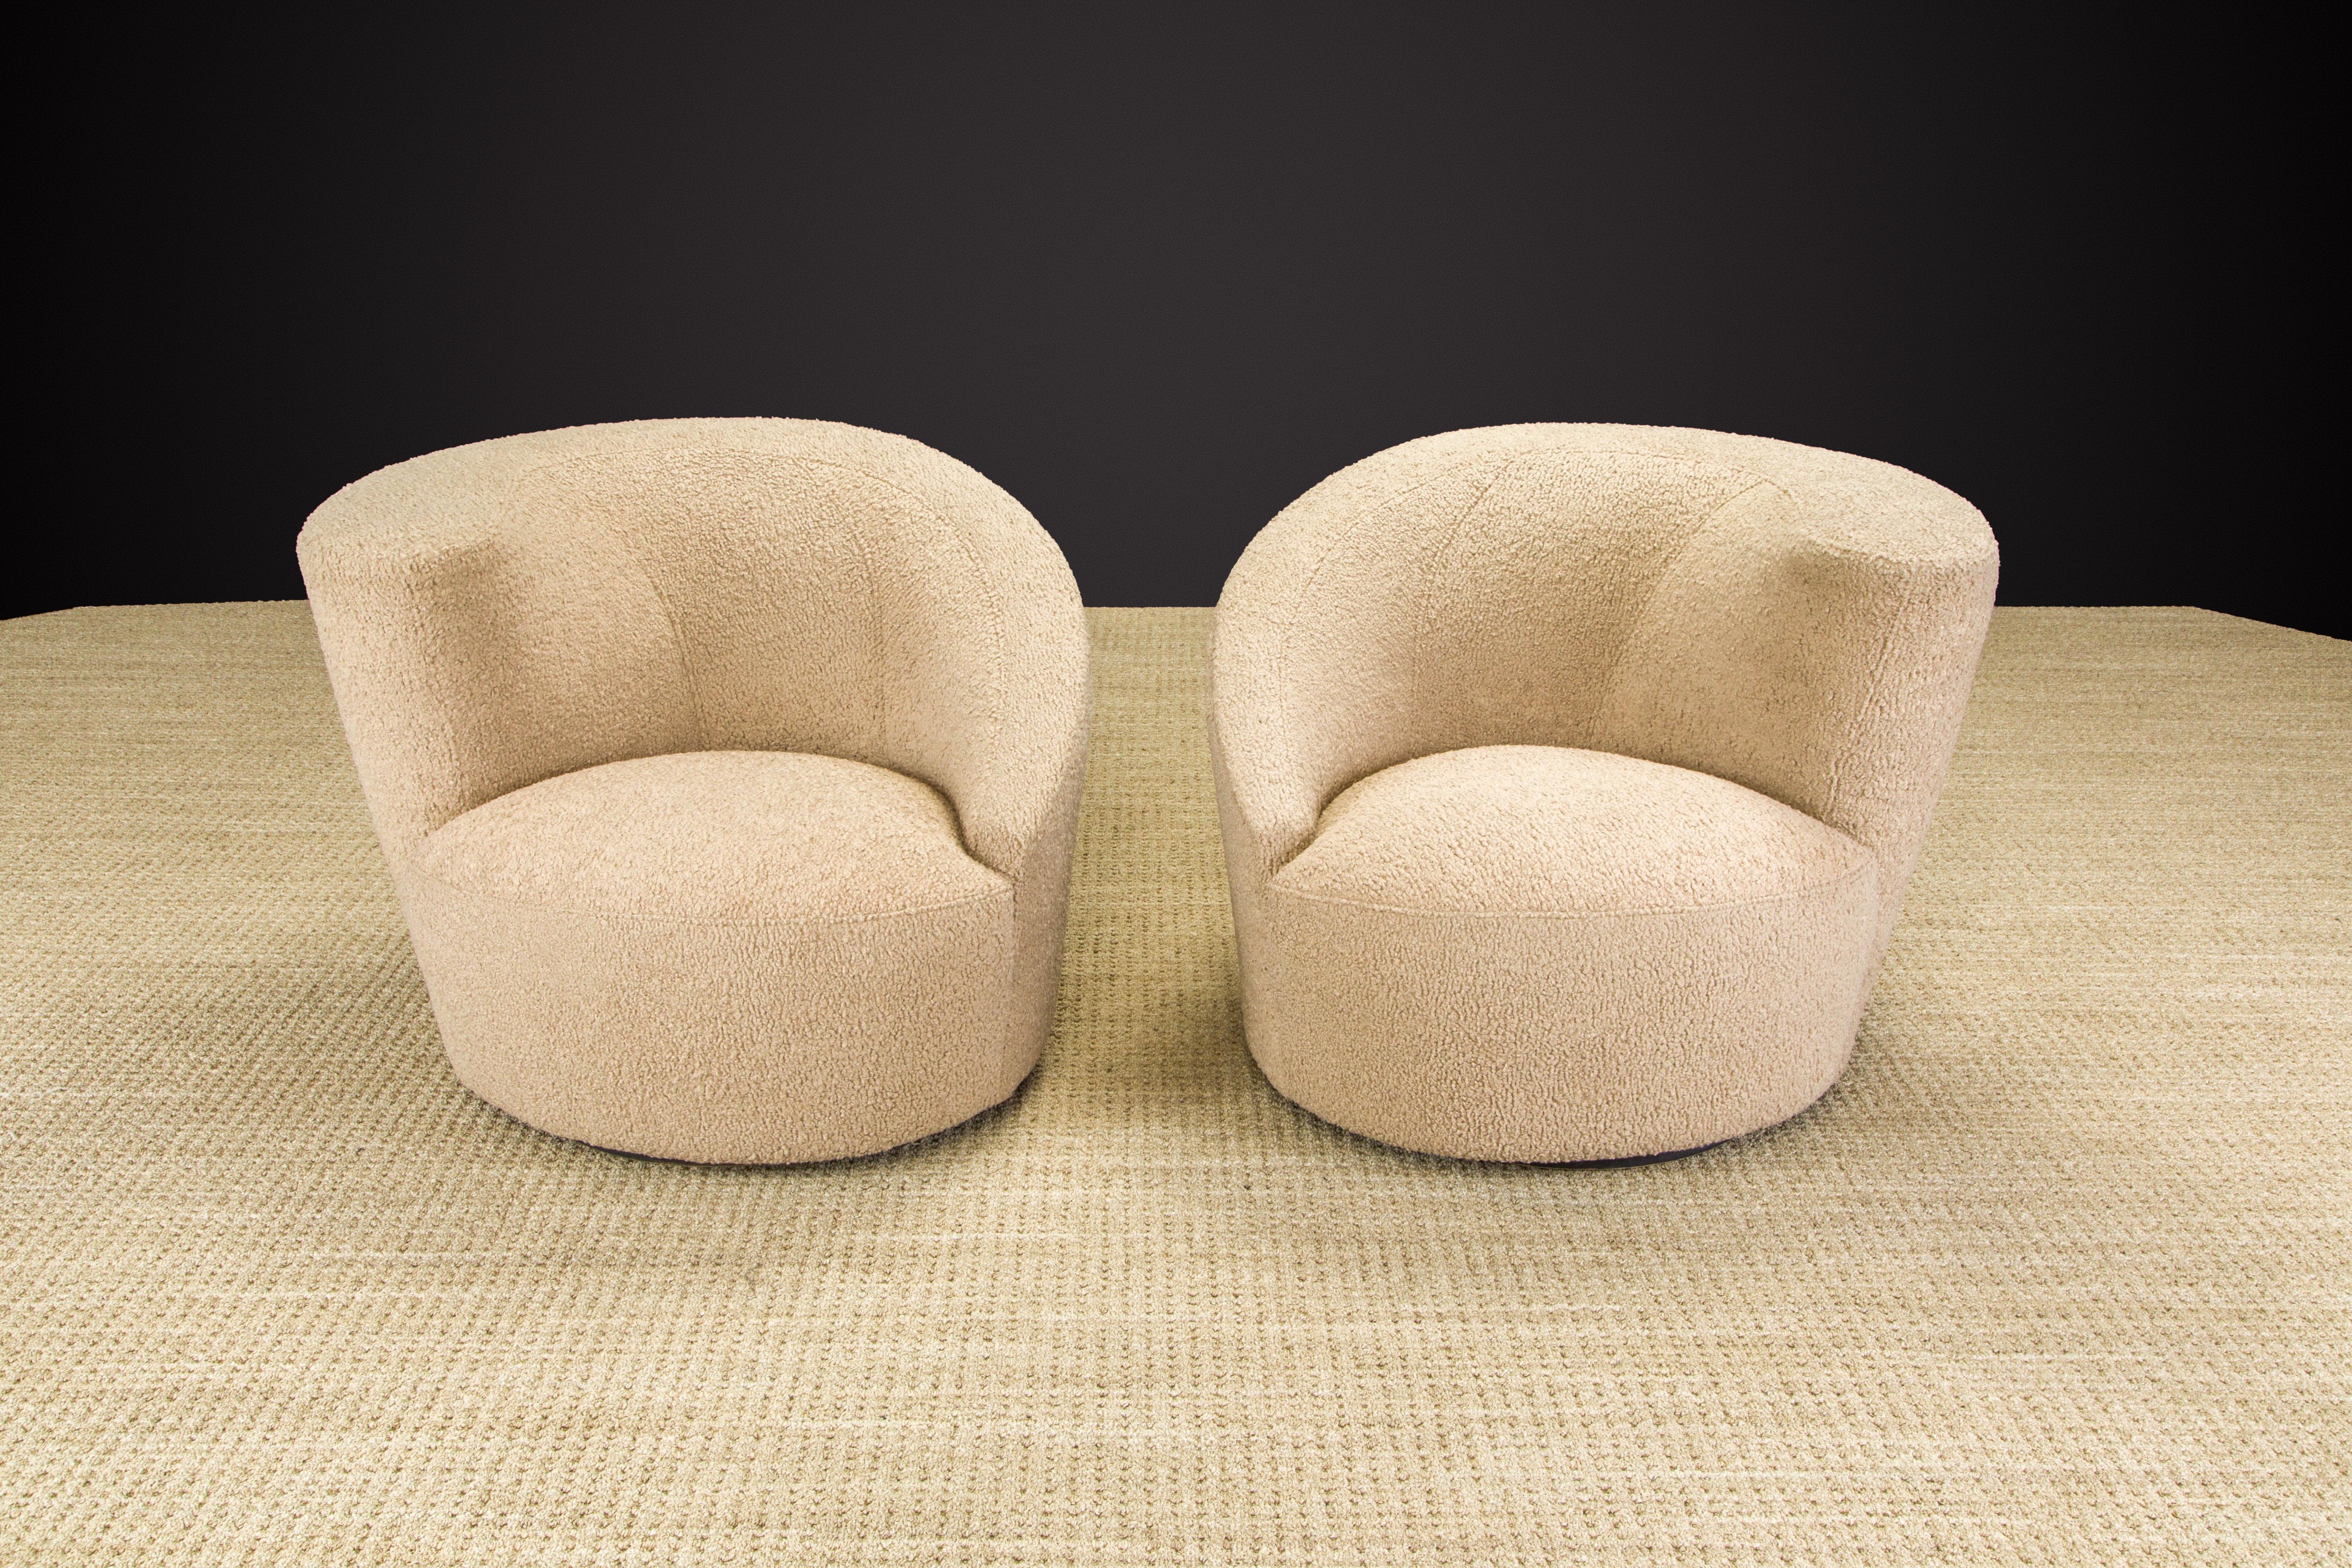 Post-Modern Vladimir Kagan Pair of Corkscrew Swivel Chairs for Directional in Bouclé, Signed